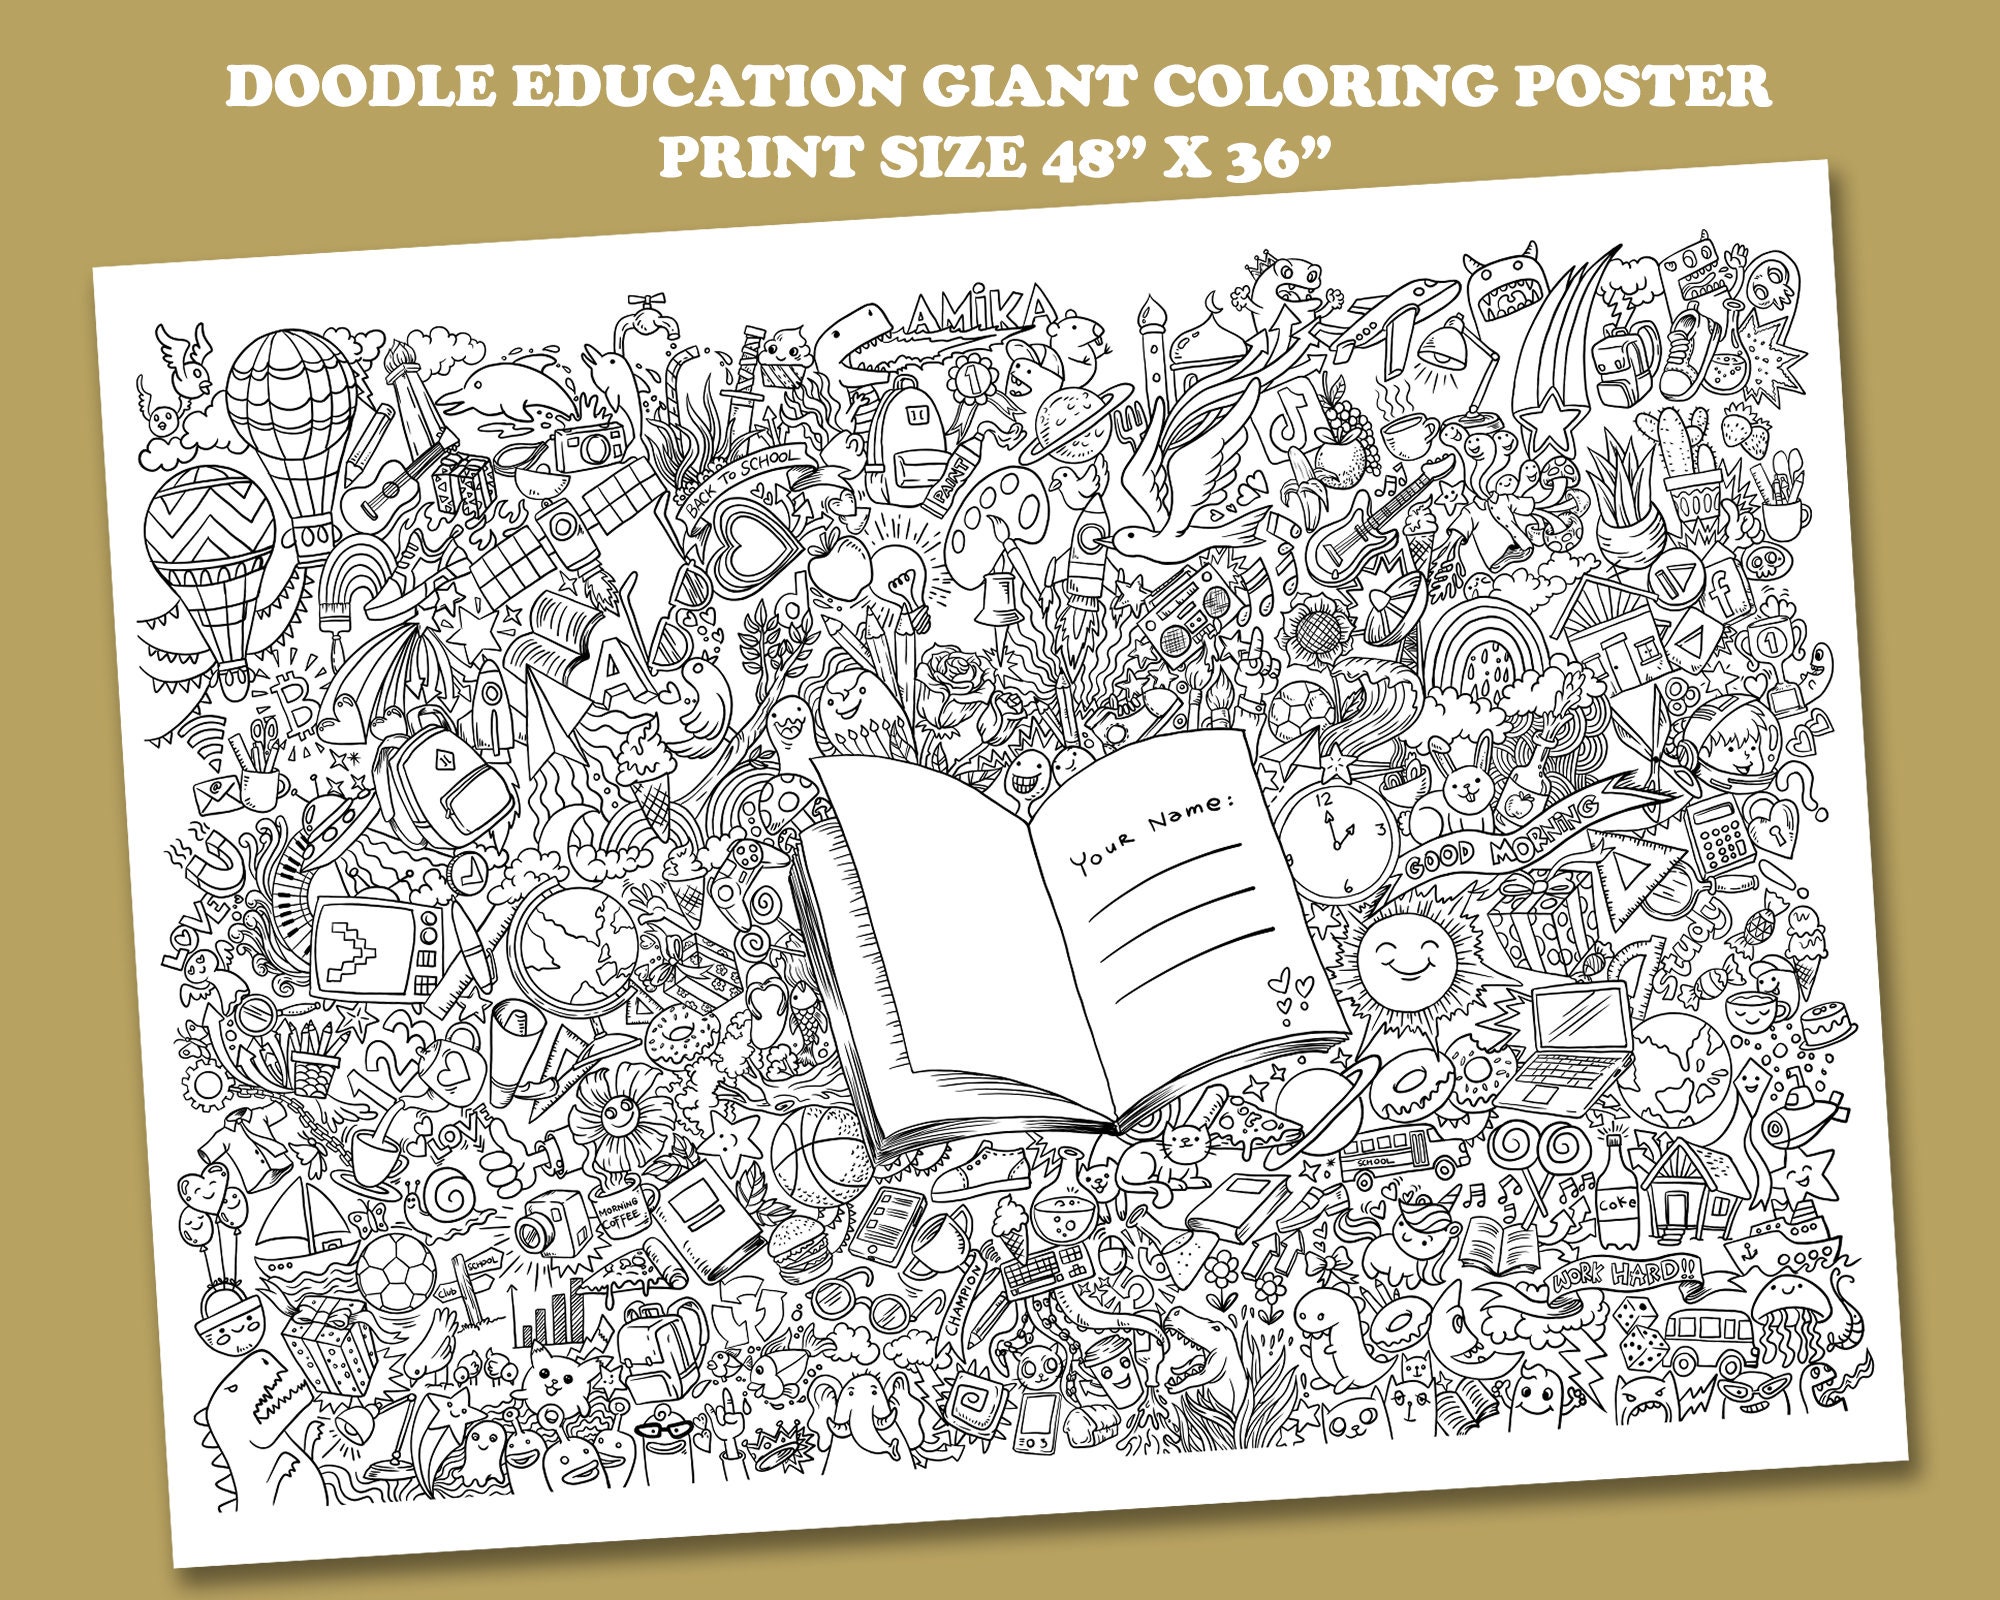 Coloring Poster, Giant Coloring Poster, Doodle, Doodle Coloring